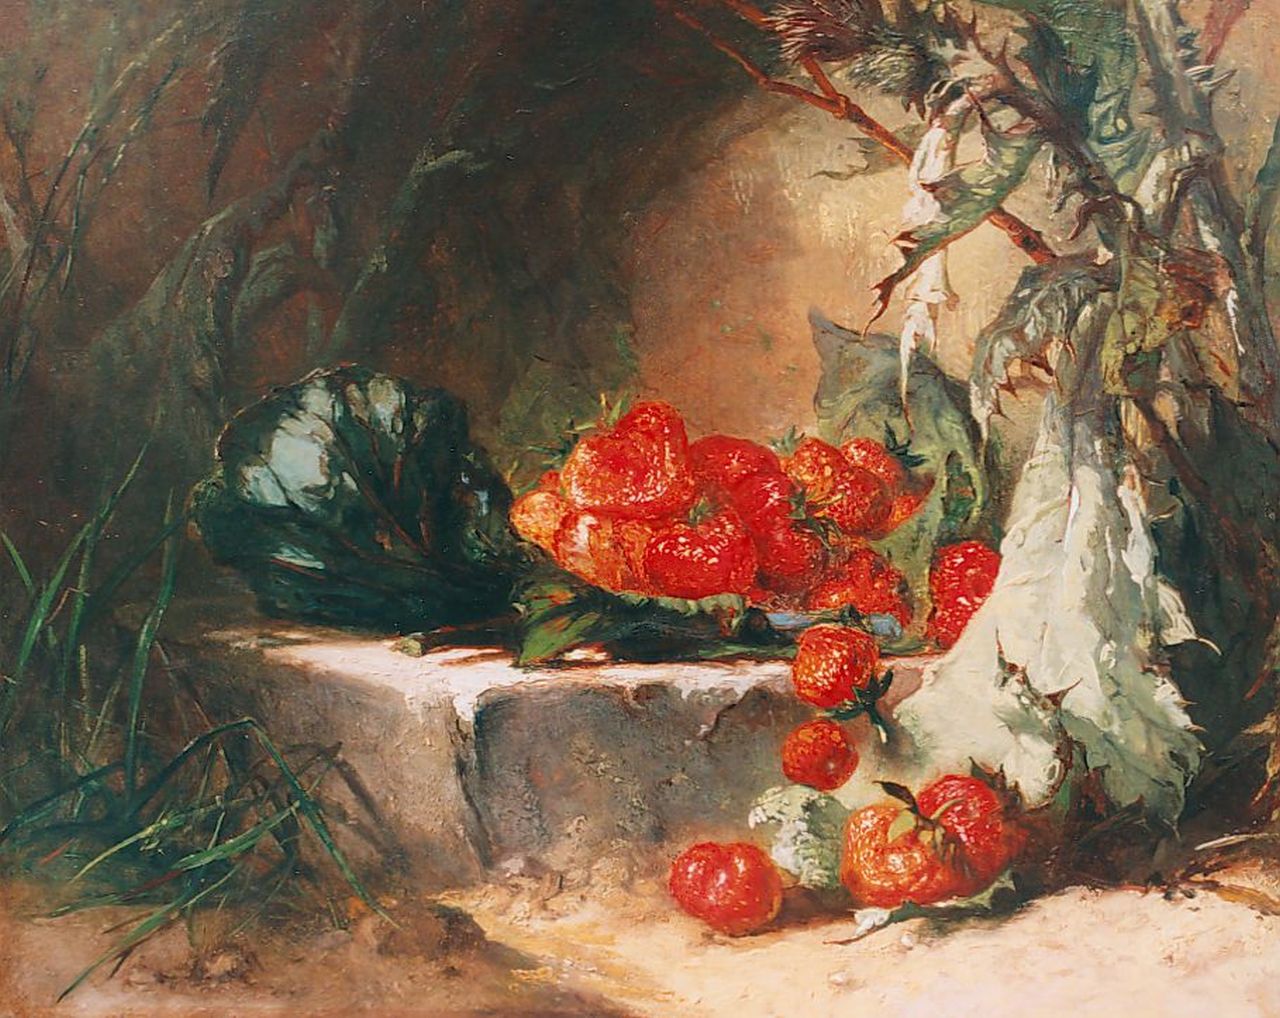 Vos M.  | Maria Vos, A still life with strawberries, oil on panel 33.2 x 41.3 cm